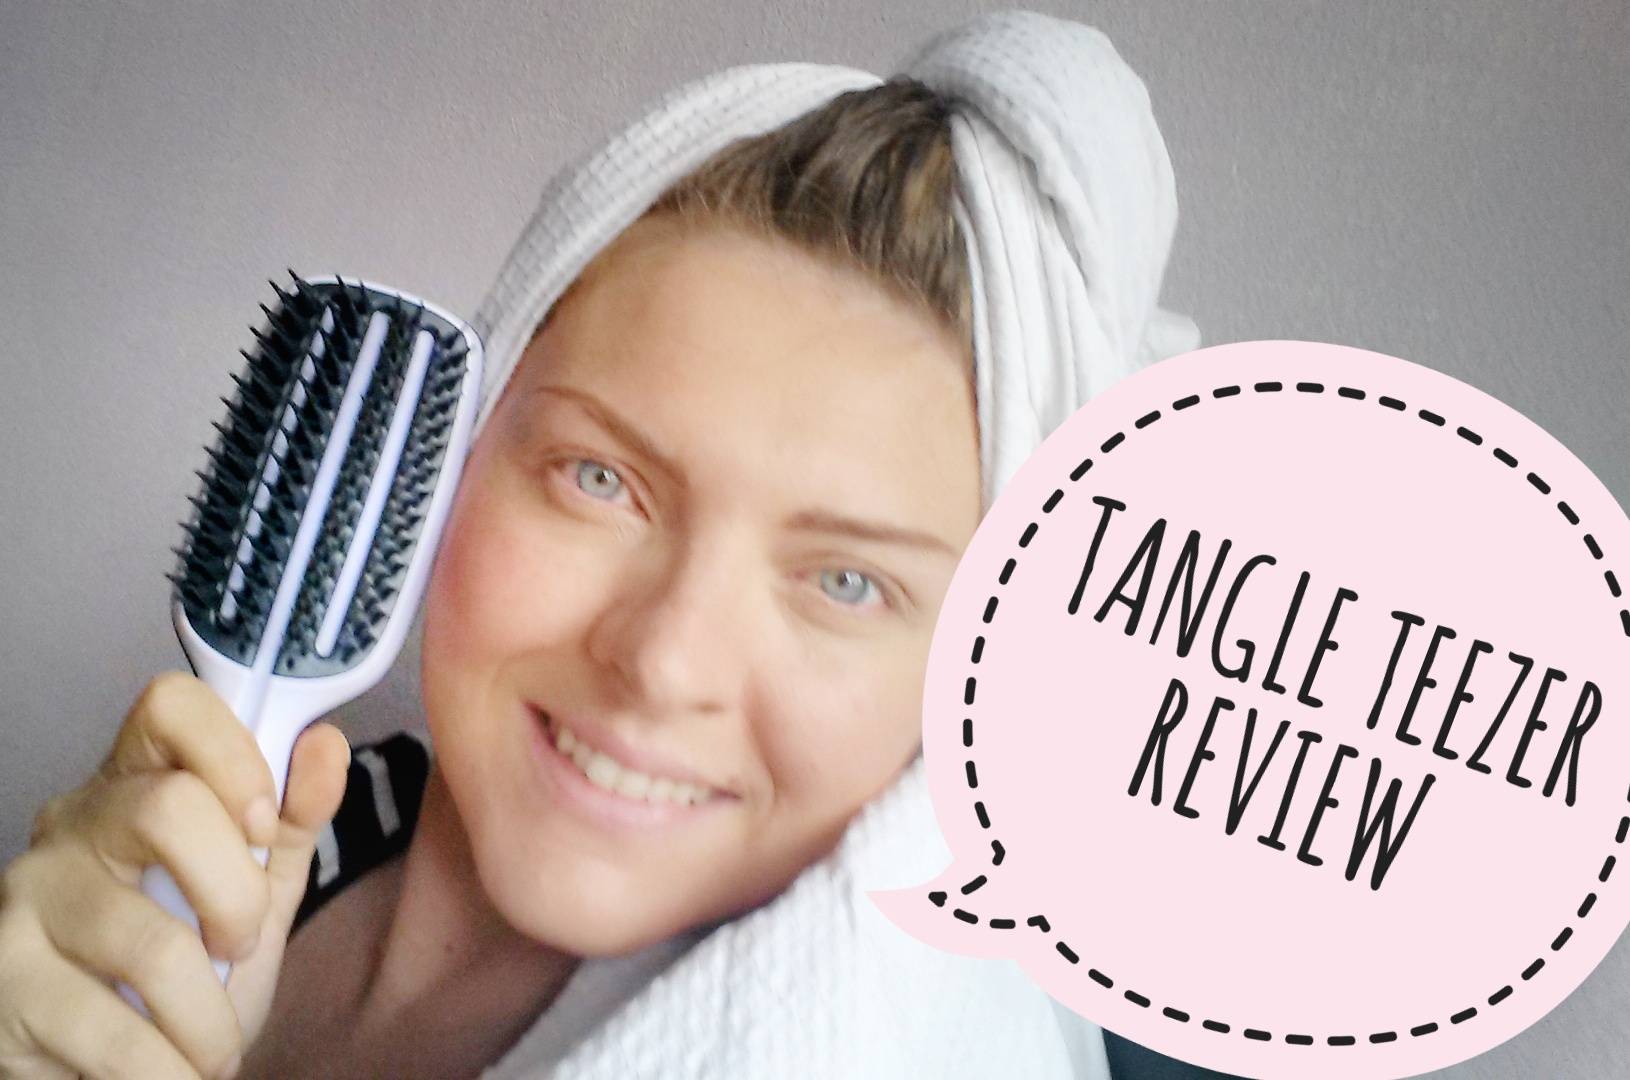 tangle-teezer-blow-styling-recensione